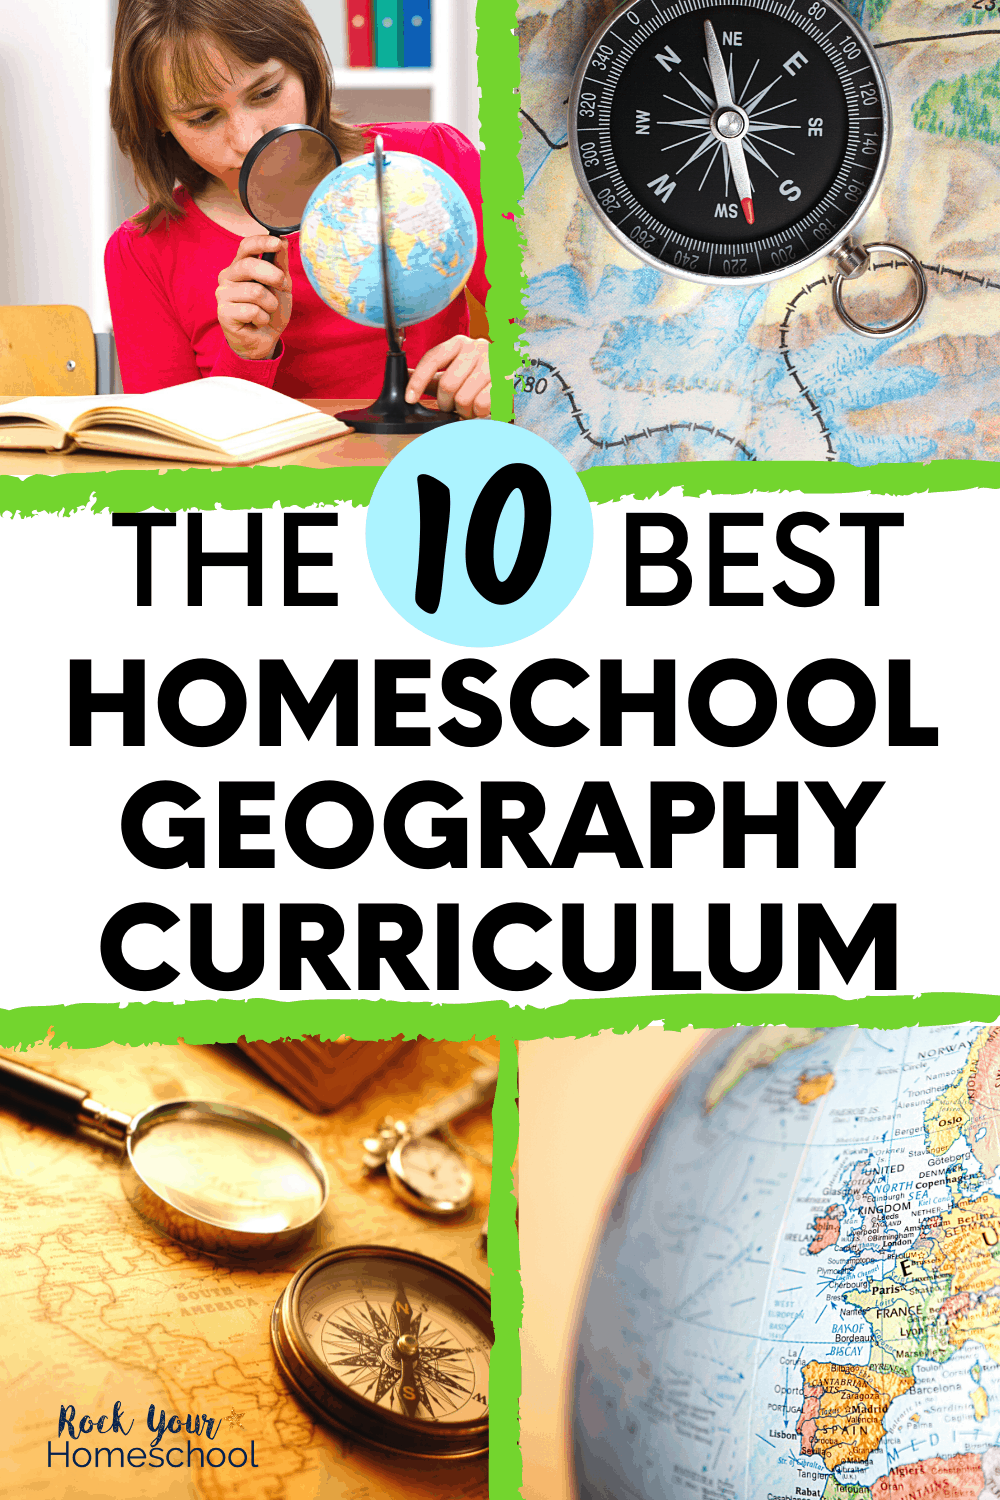 The 10 Best Homeschool Geography Curriculum Parents and Kids Love